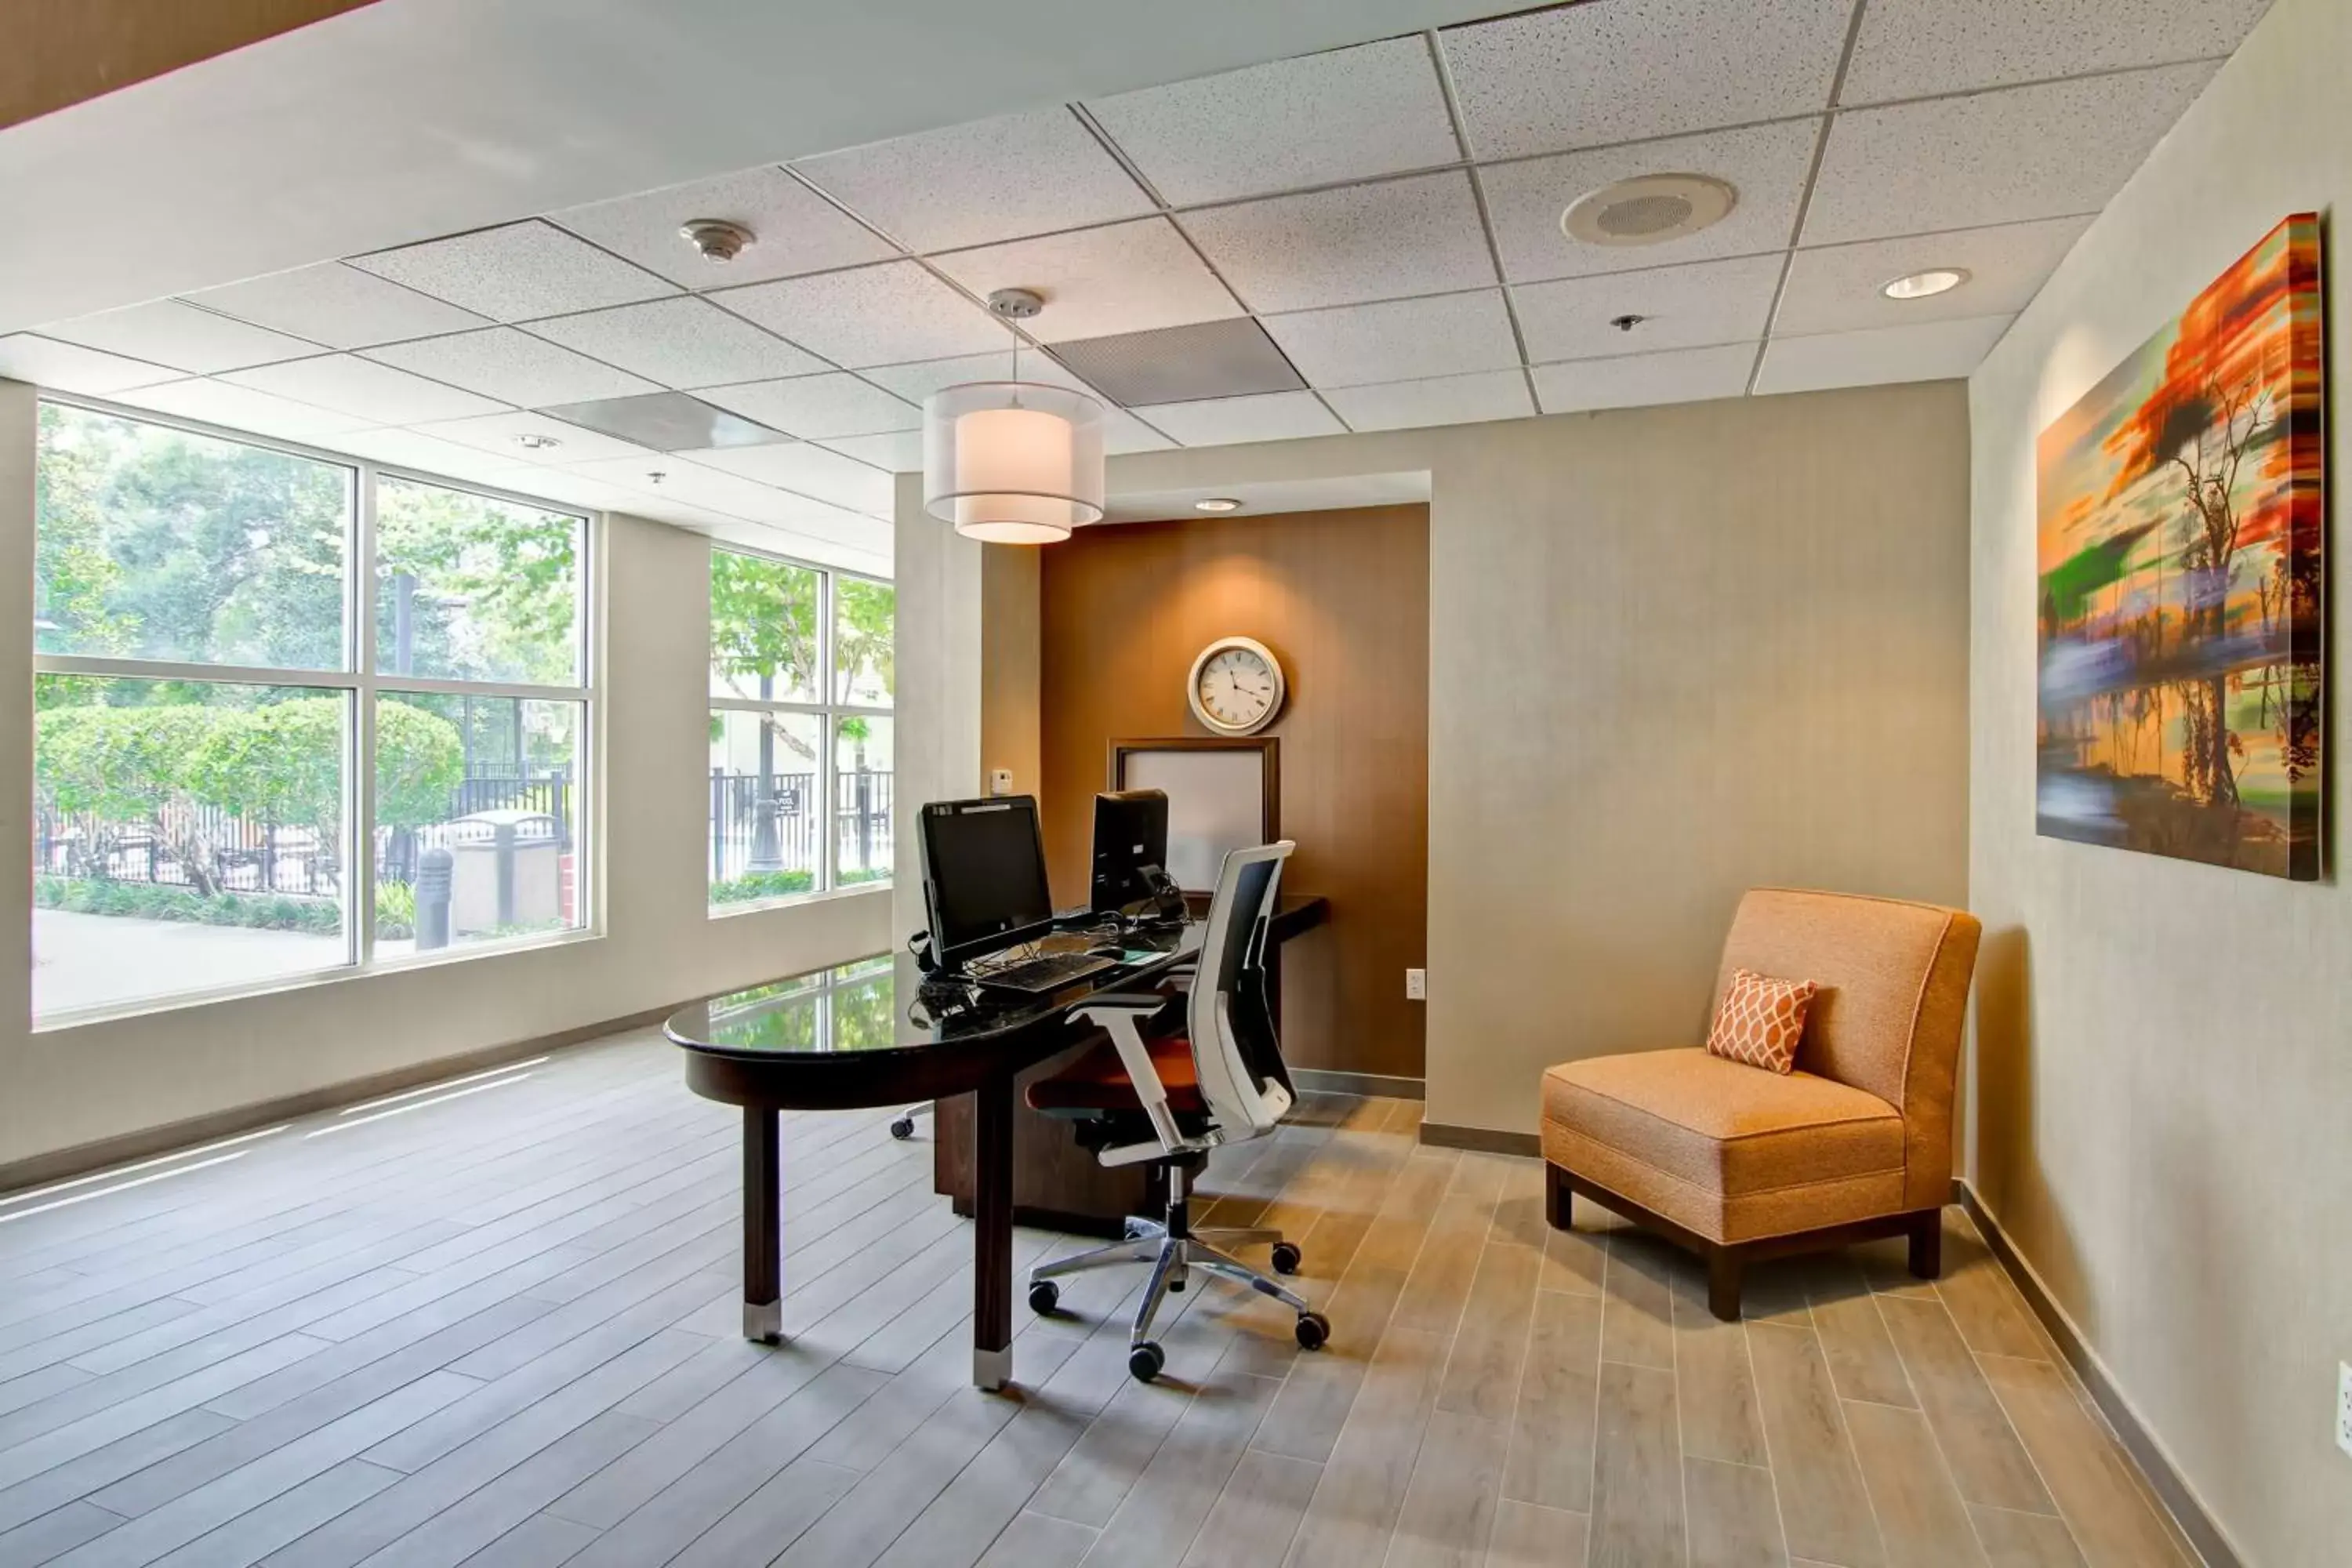 Business facilities in Homewood Suites Houston Kingwood Parc Airport Area